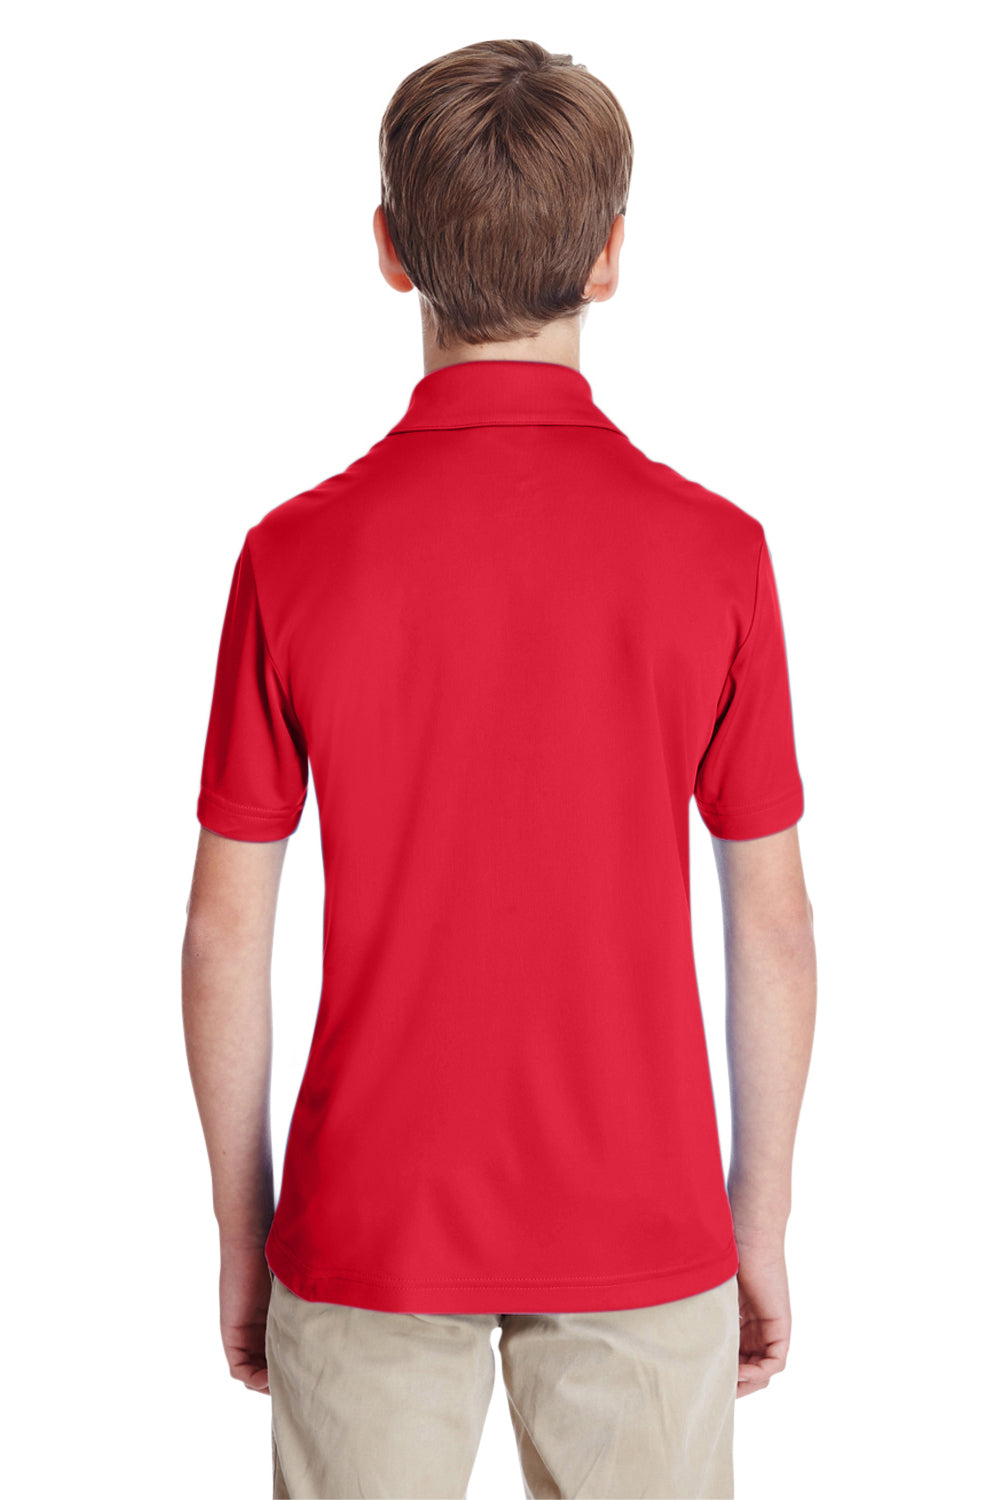 Team 365 TT51Y Youth Zone Performance Moisture Wicking Short Sleeve Polo Shirt Red Back